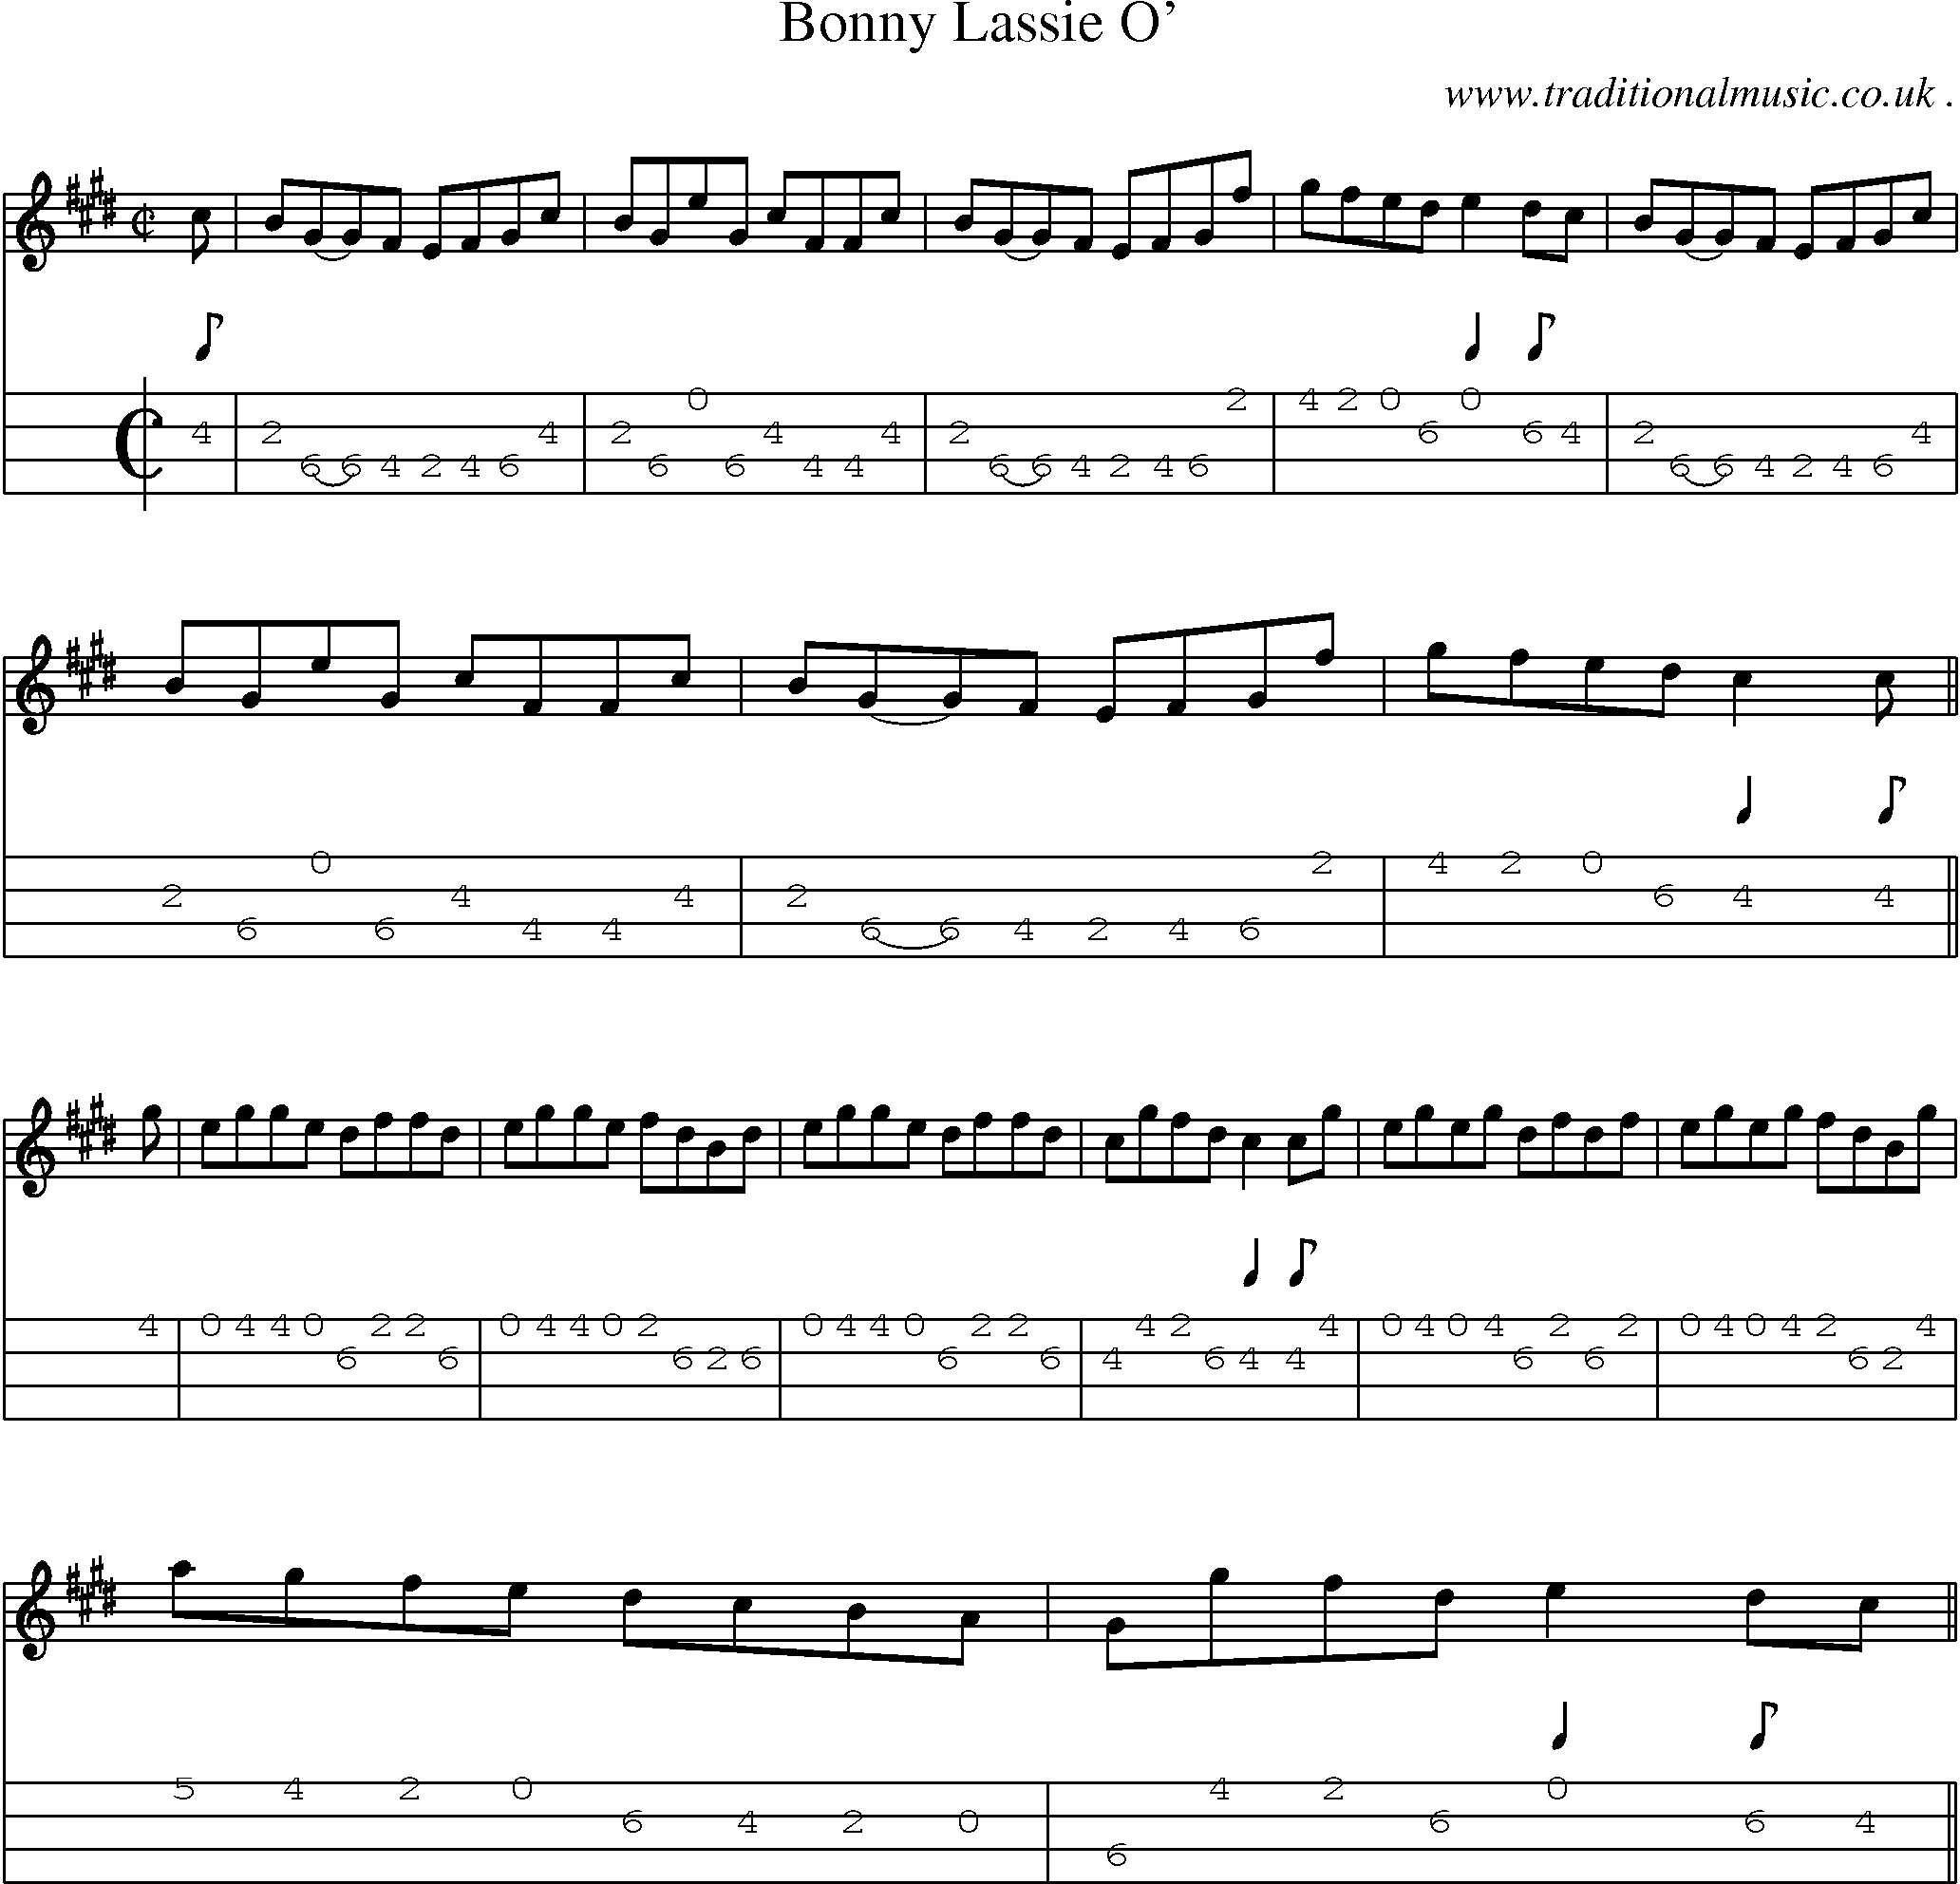 Sheet-music  score, Chords and Mandolin Tabs for Bonny Lassie O